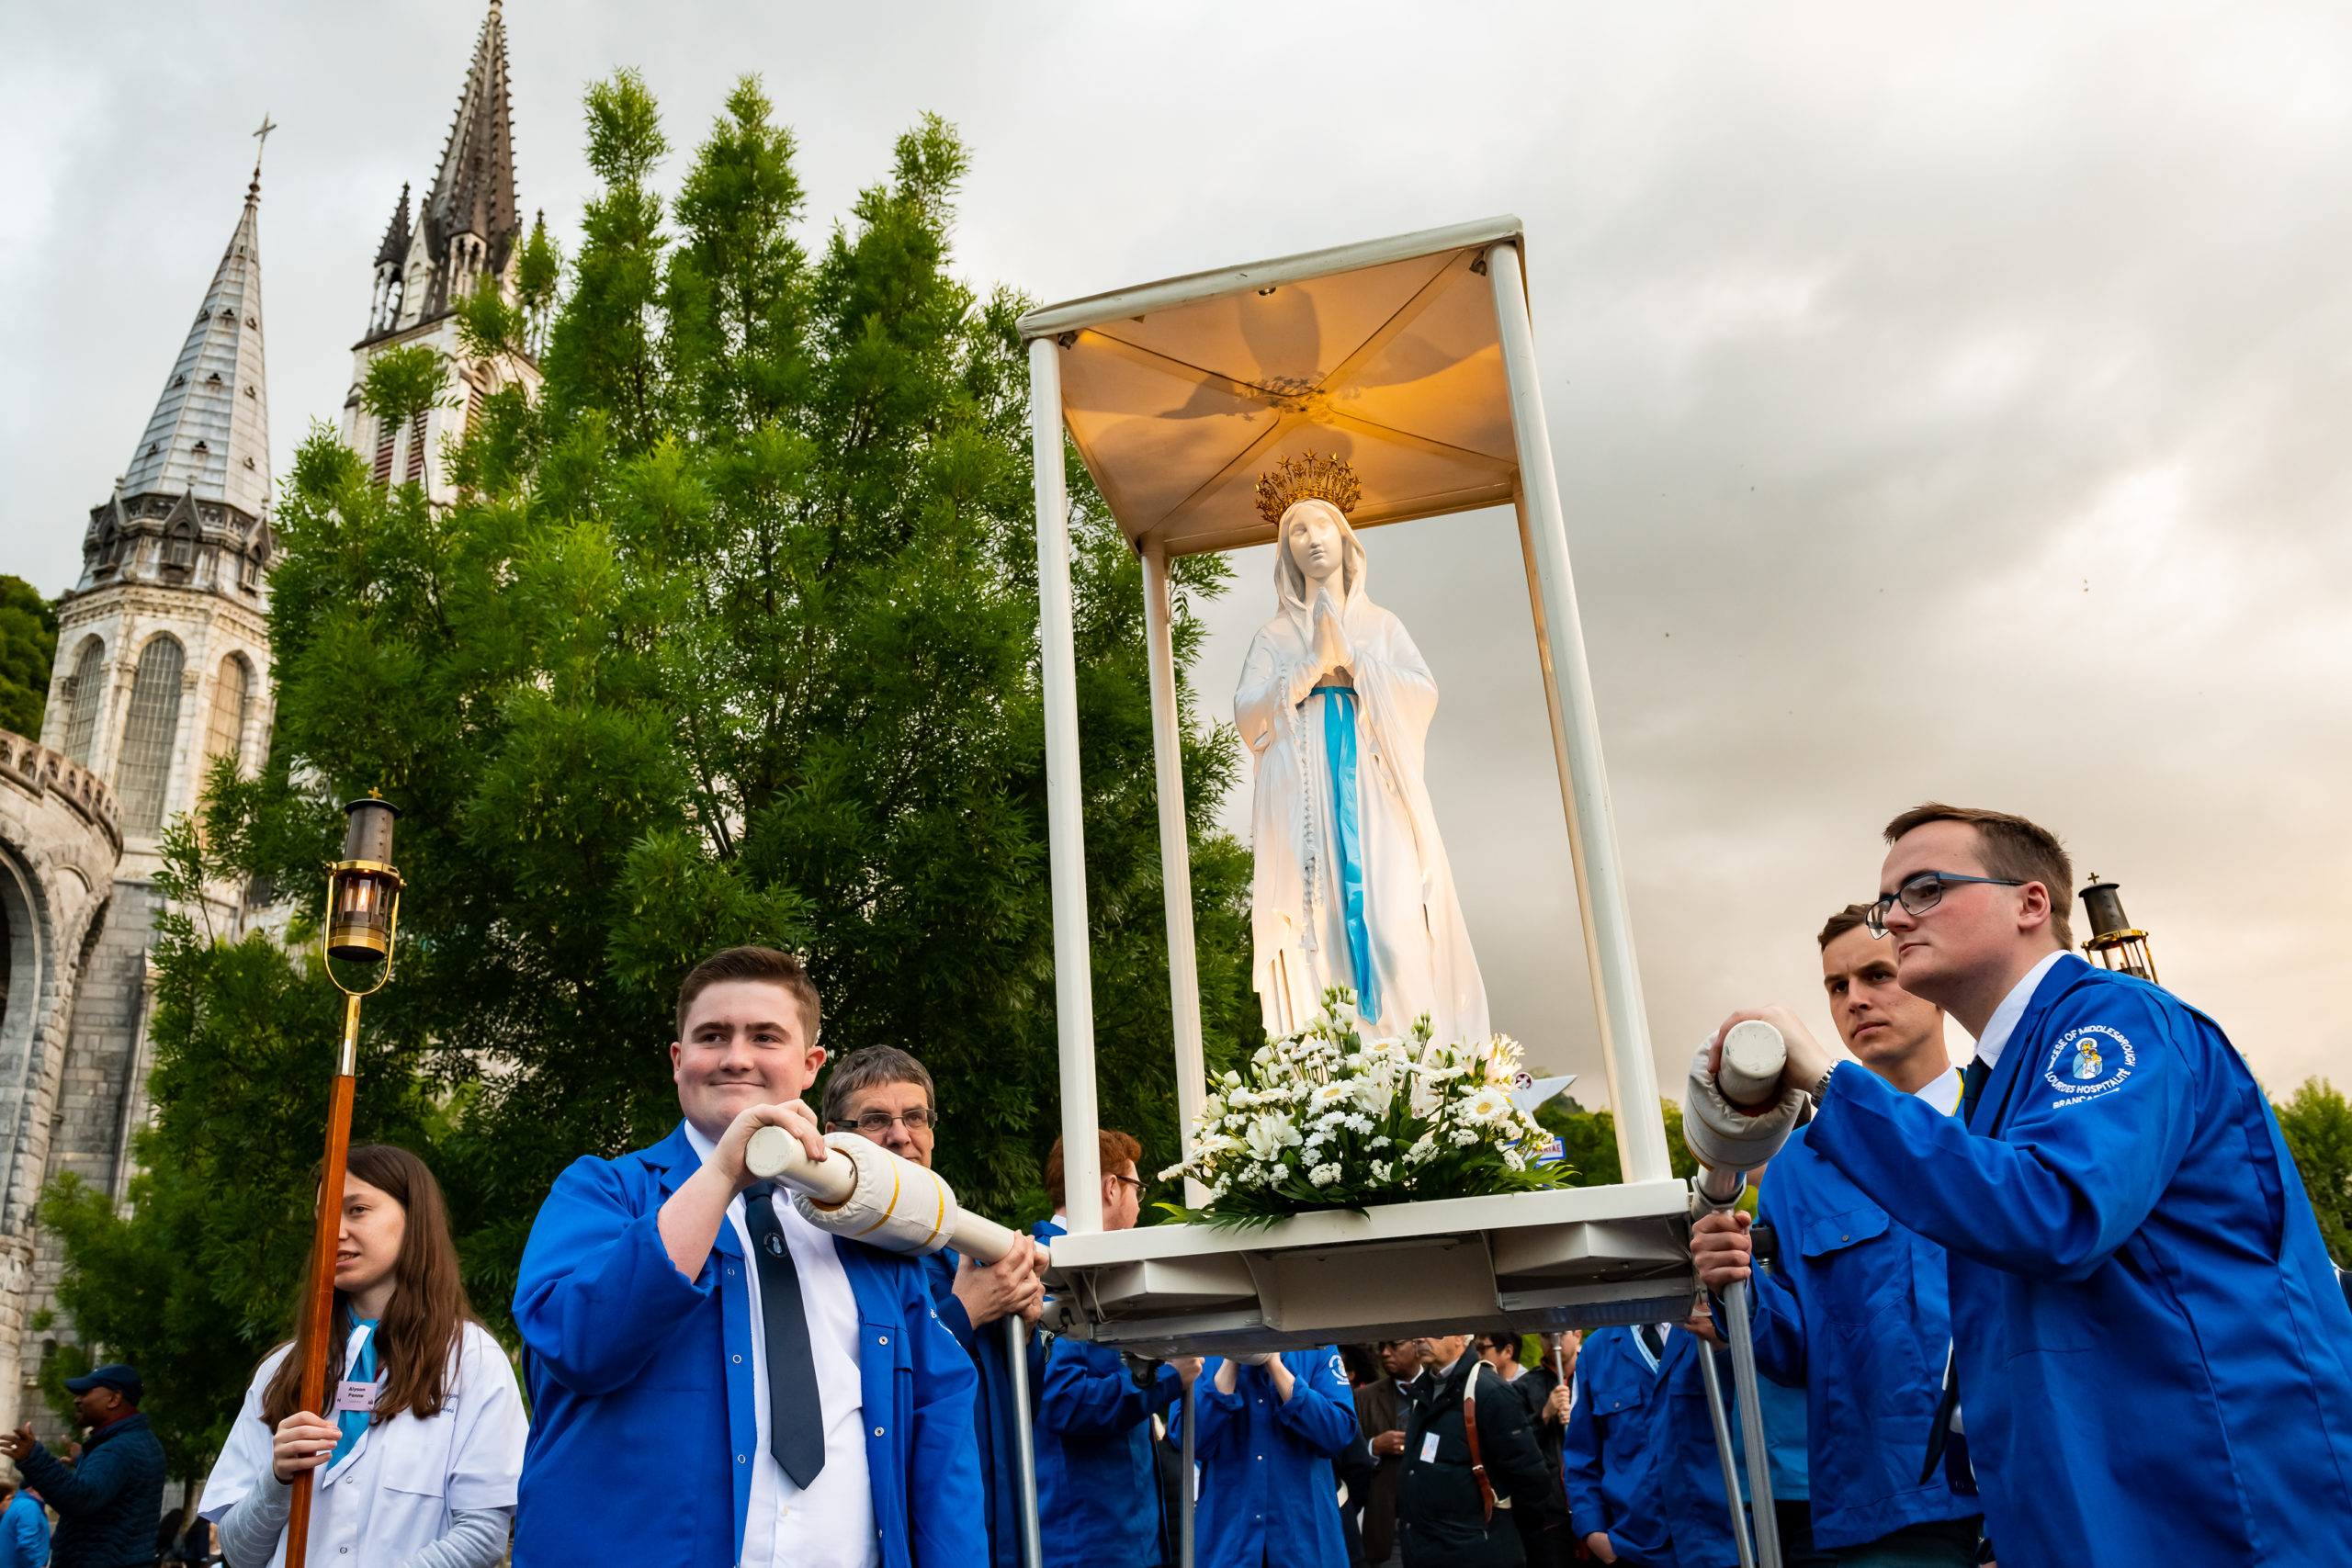 Matty Carpenter, Martin Thorpe, Kieran McIntyre and Ashley carrying the statue of Our Lady in the Torchlight Marian Procession – Photo courtesy of Lacaze, Lourdes